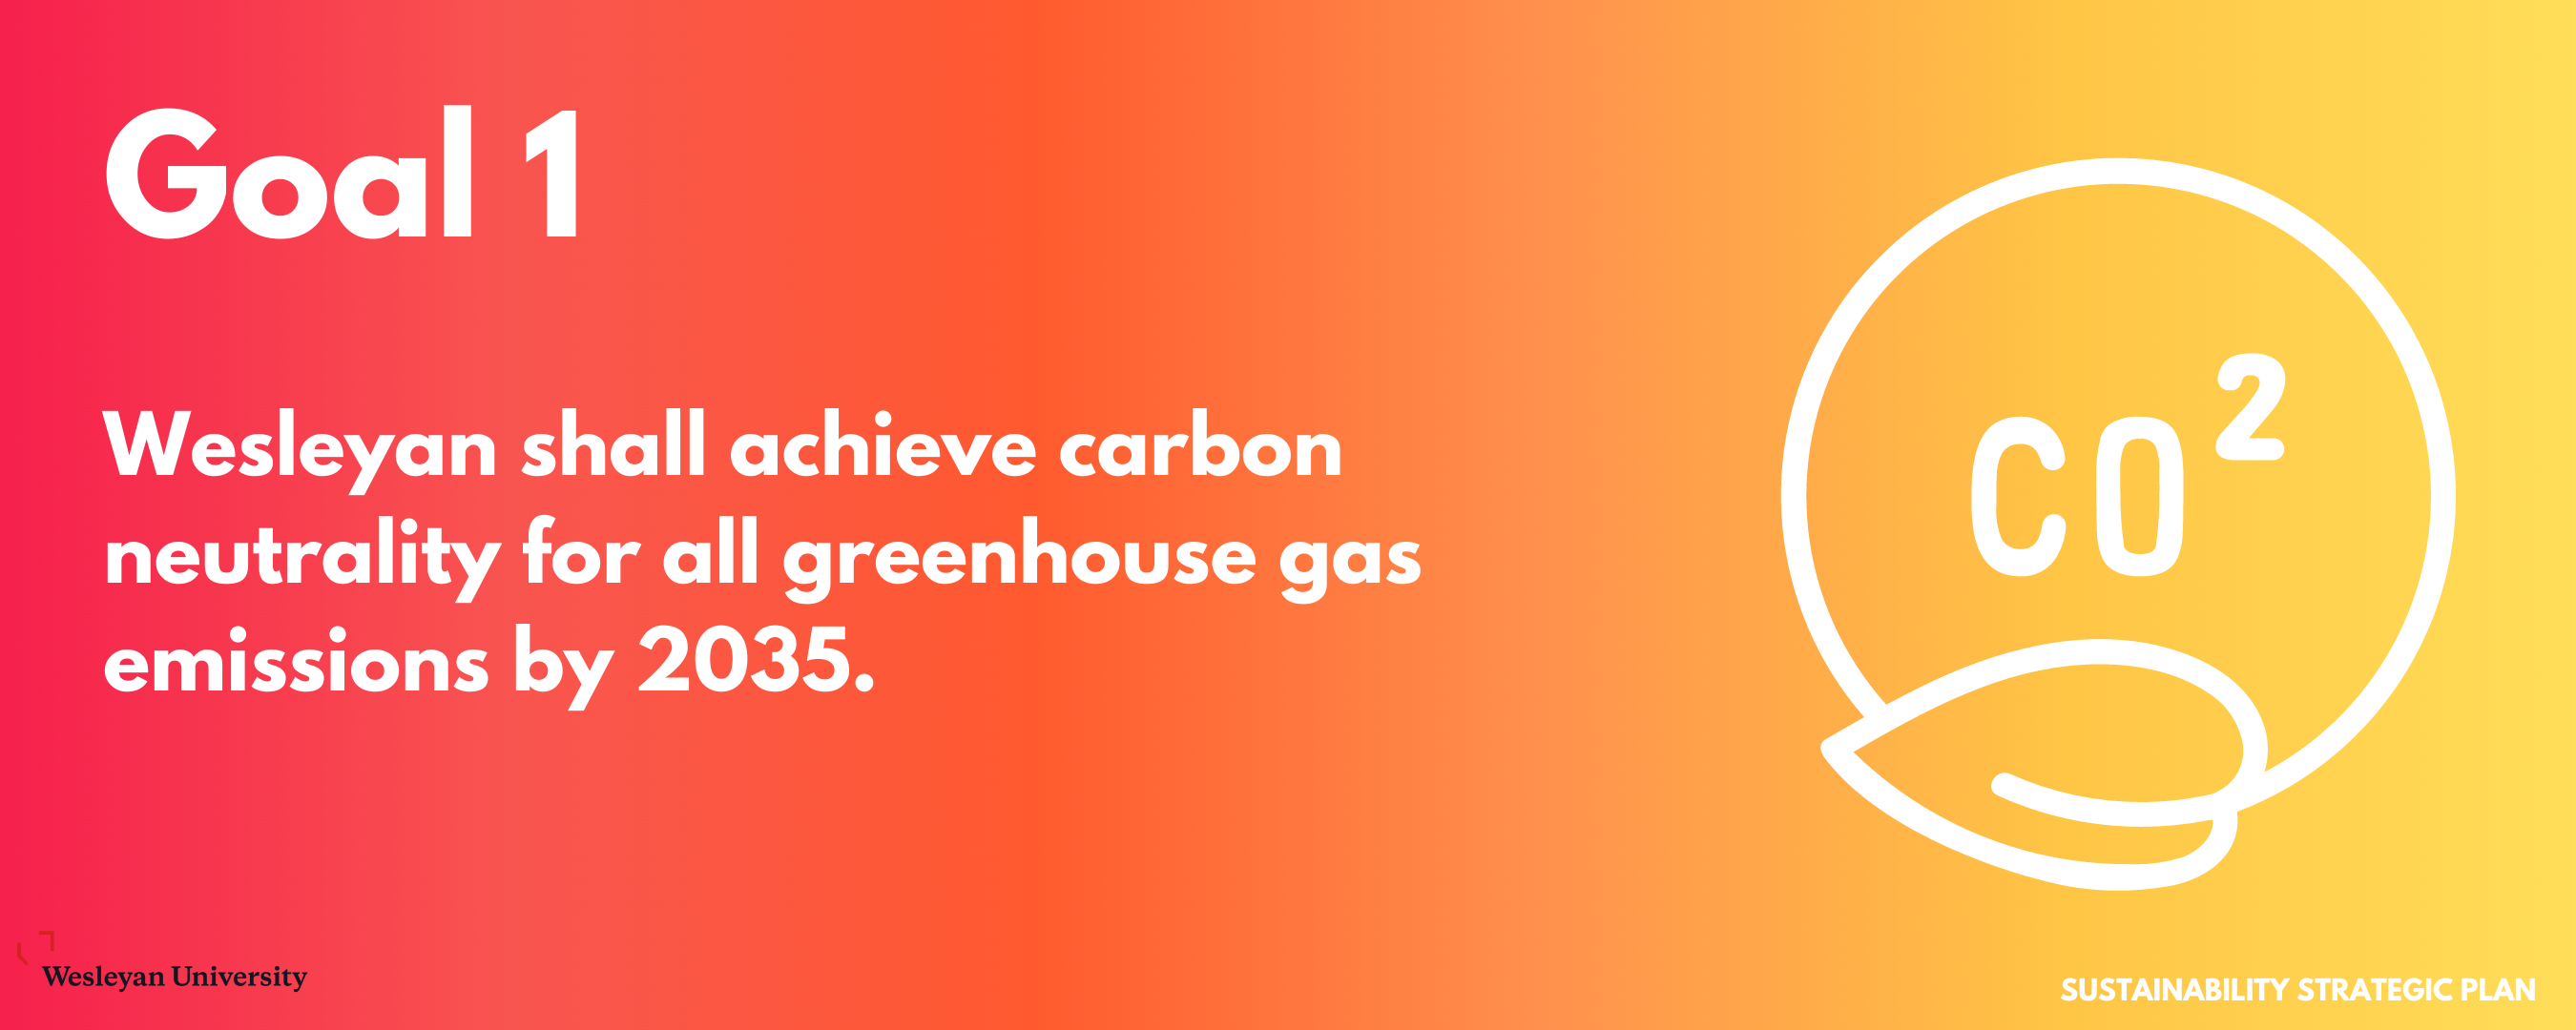 Goal 1: Wesleyan shall achieve carbon neutrality for all greenhouse gas emissions by 2035.